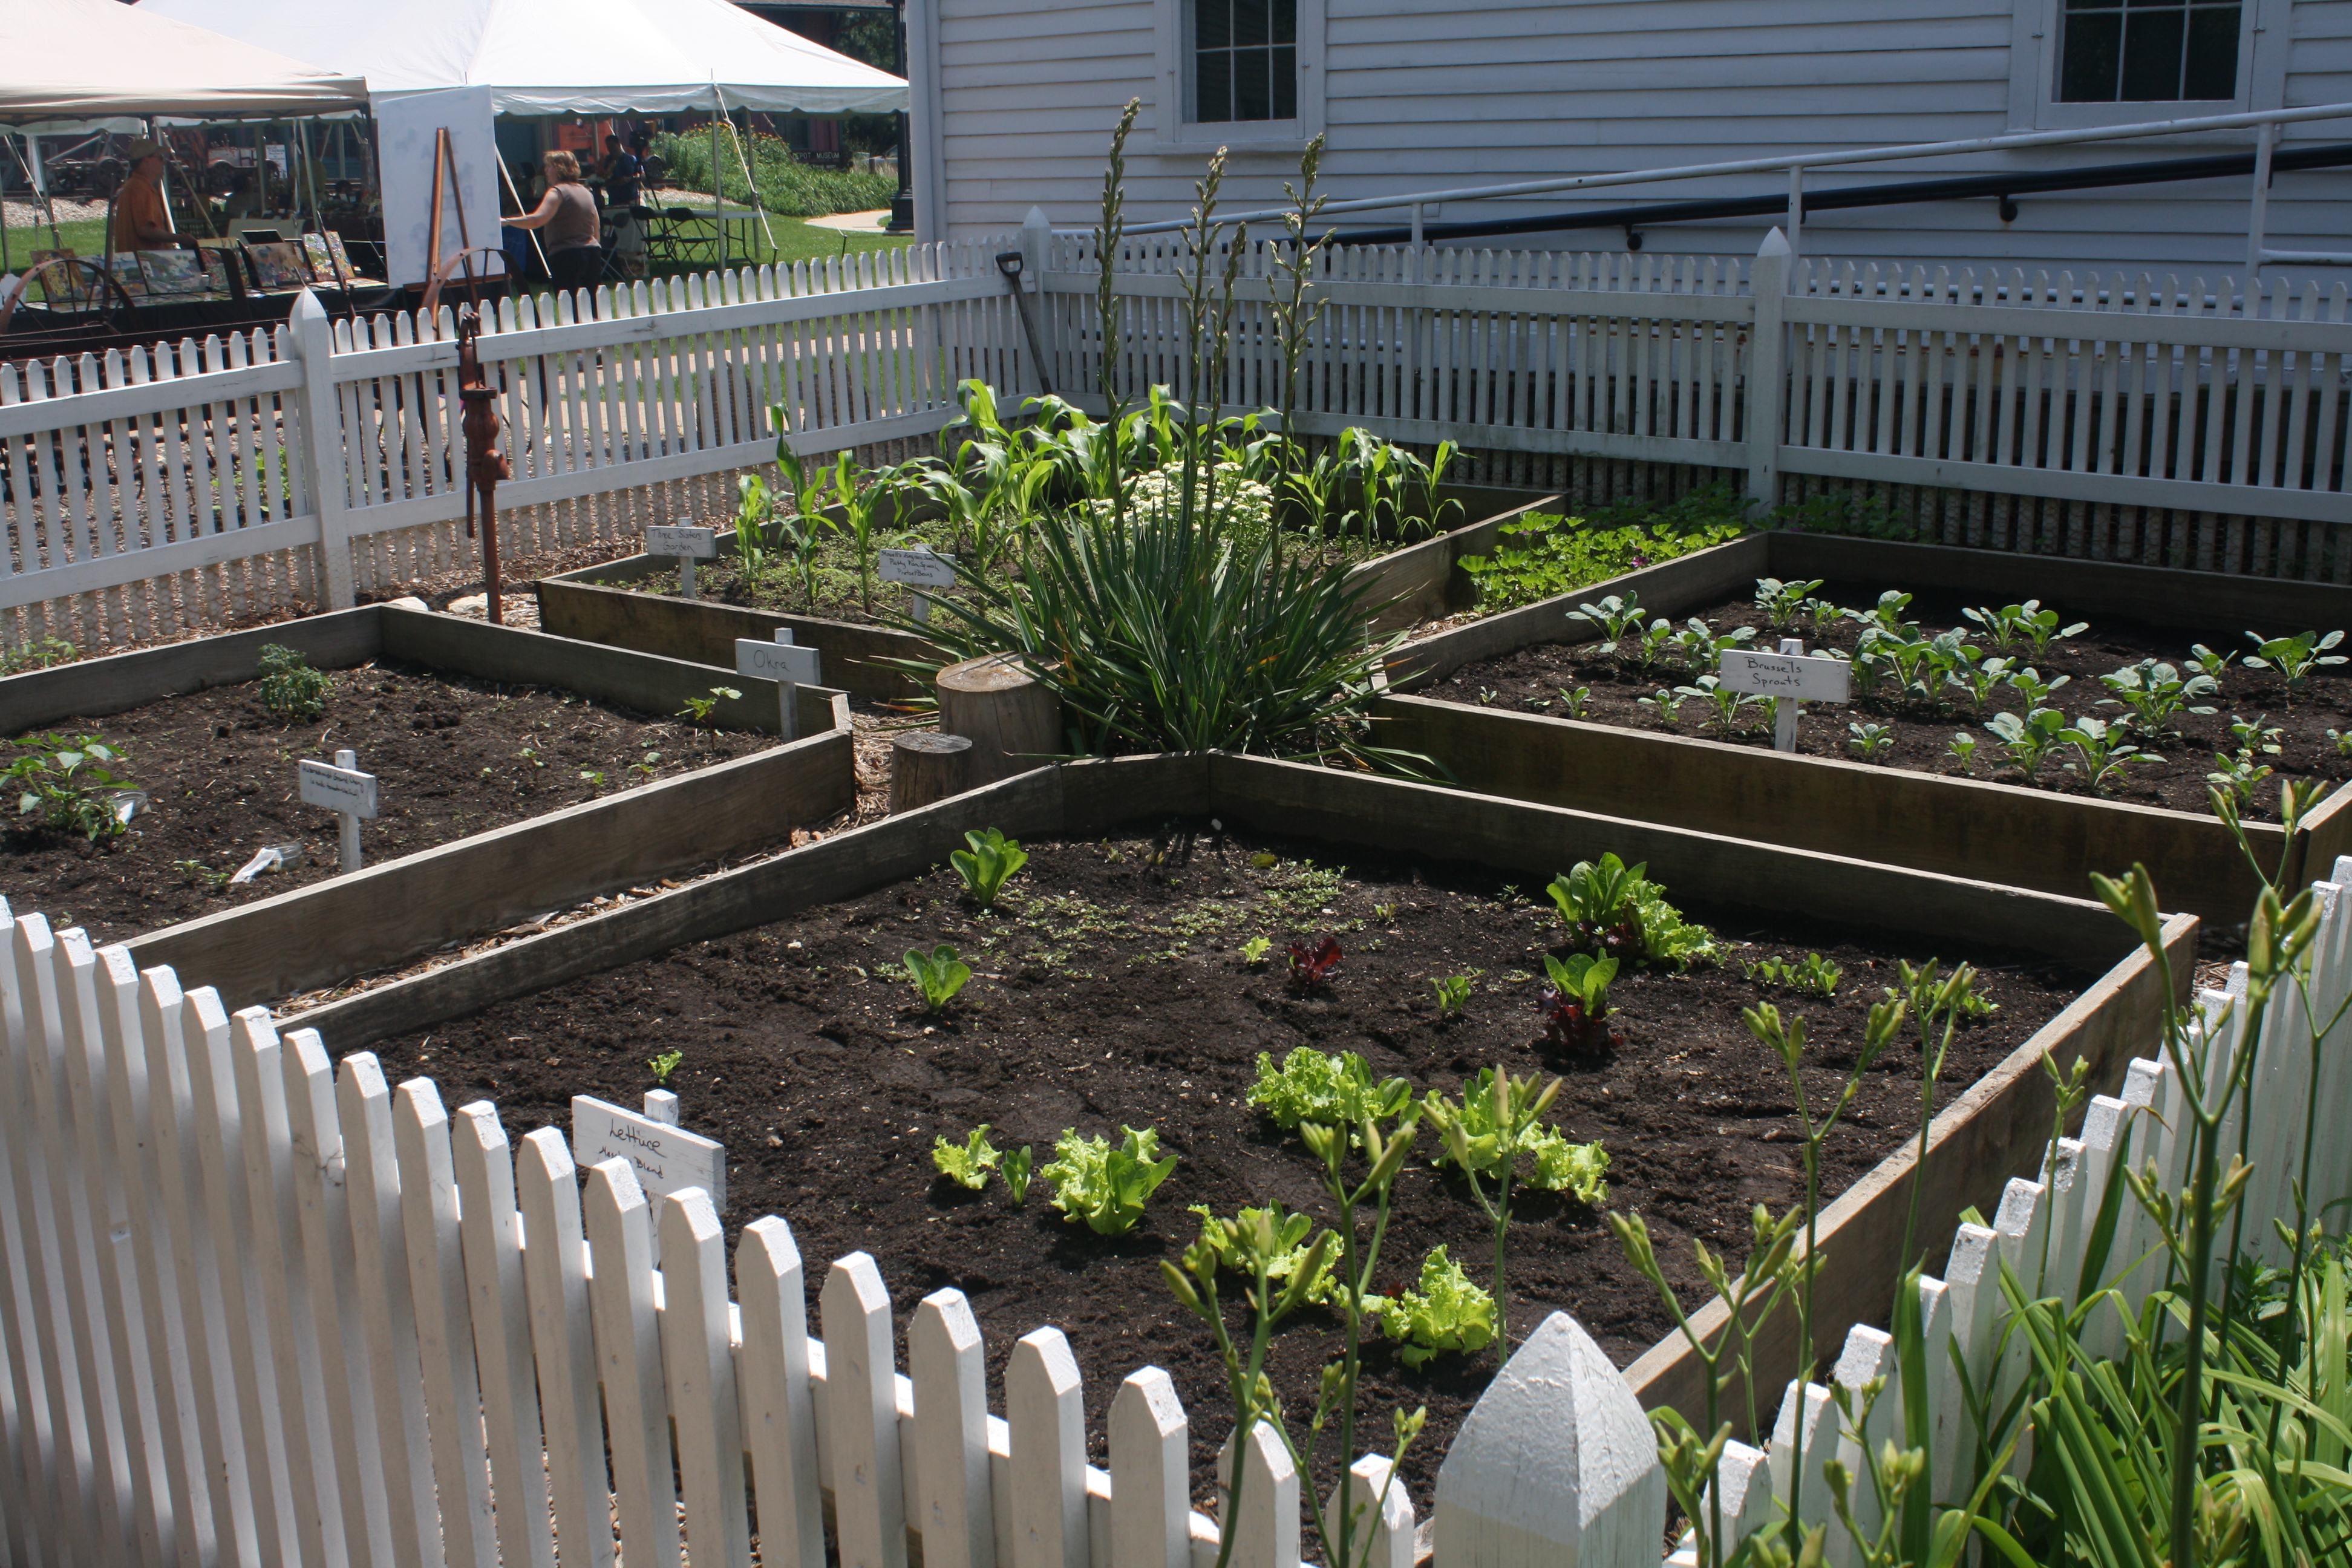 A four-square garden has four equal areas with different plantings and space between to walk and work. Notice the original water hand pump (left).